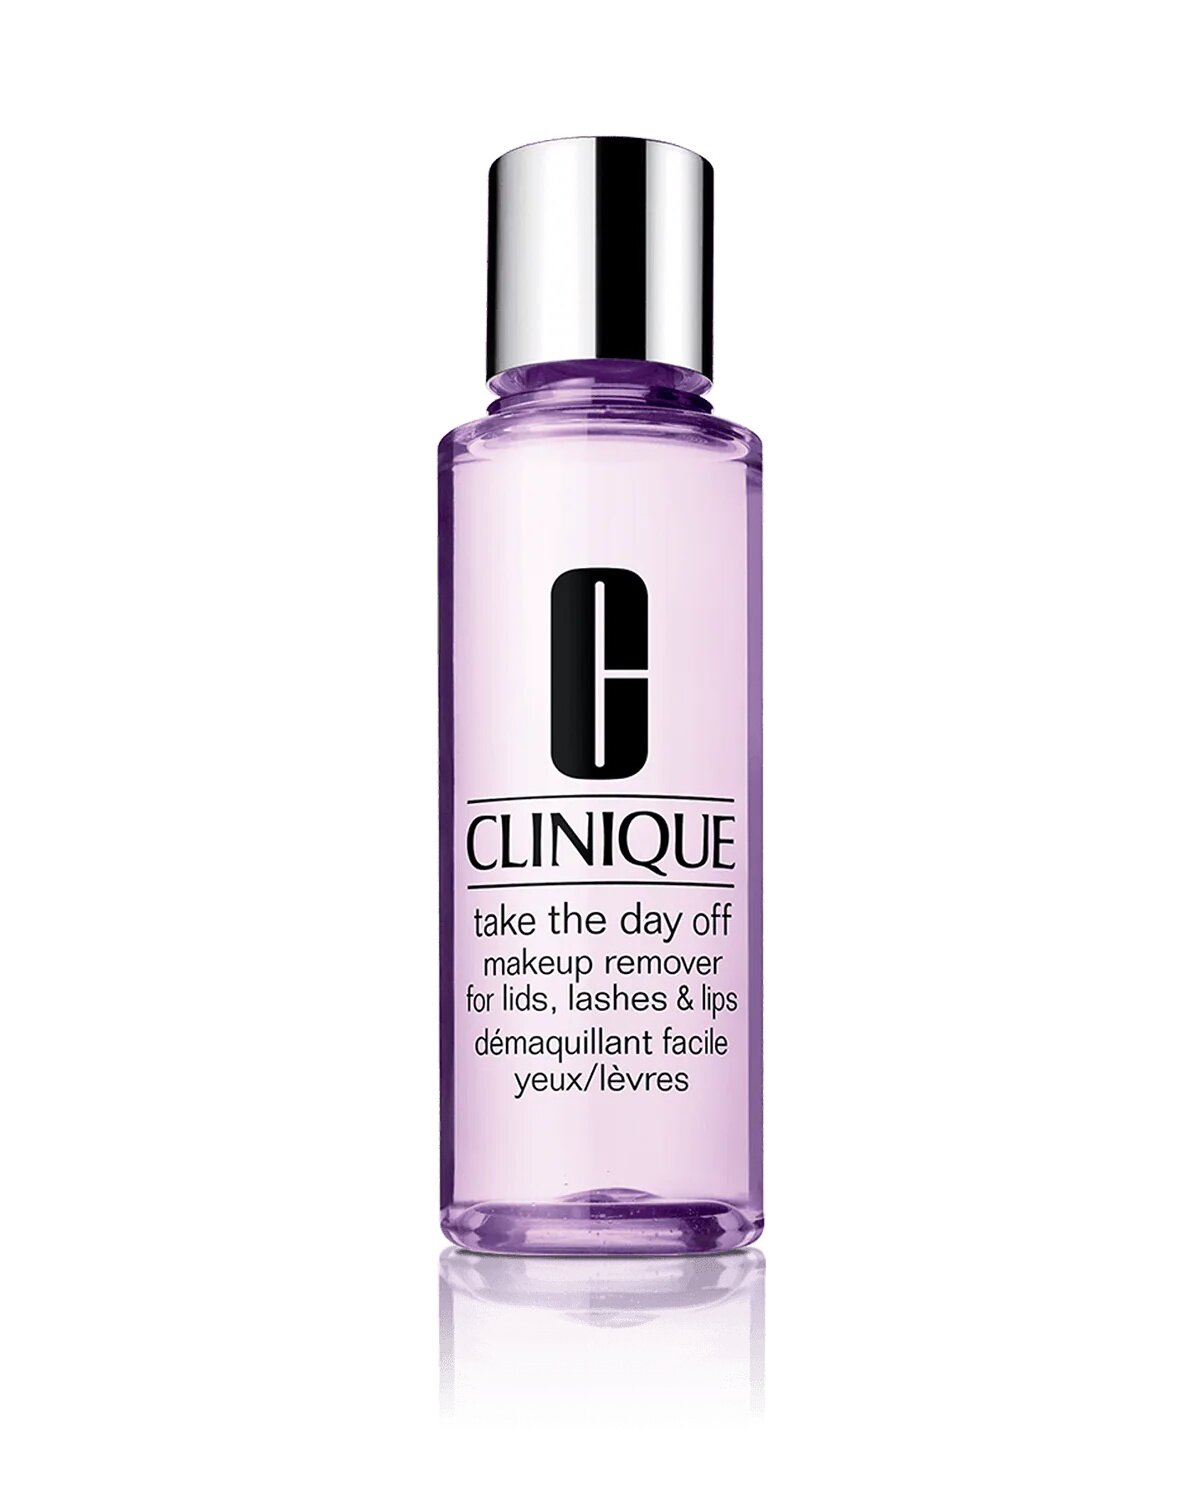 Clinique Take The Day Off 眼部唇部卸妝液 $235/125ml